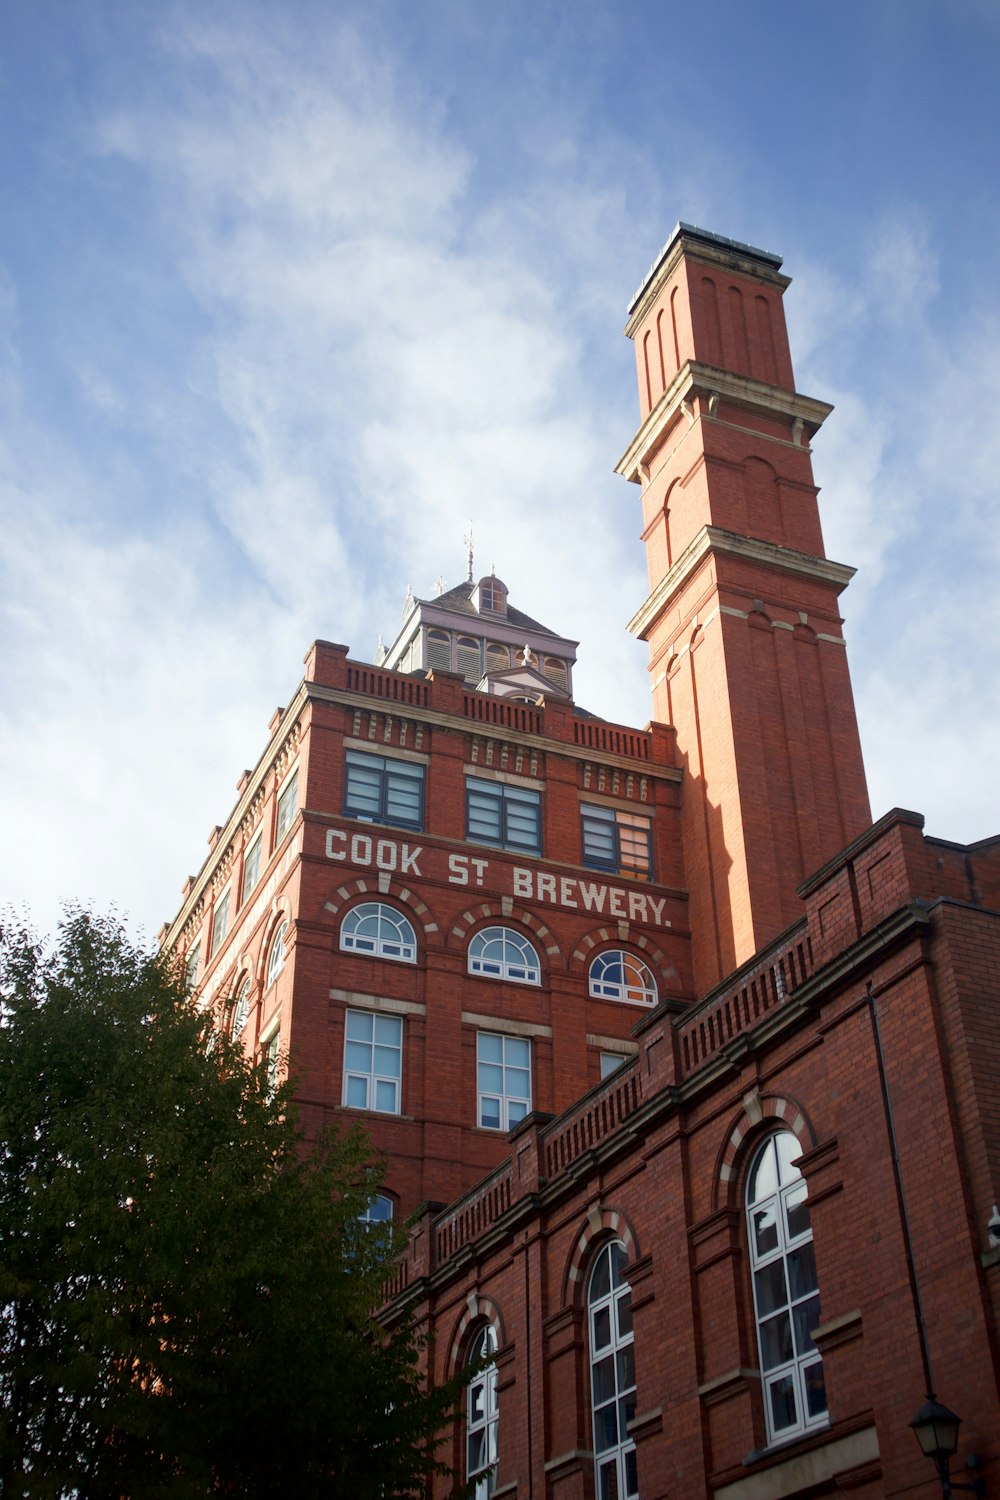 Cook St. Brewery building